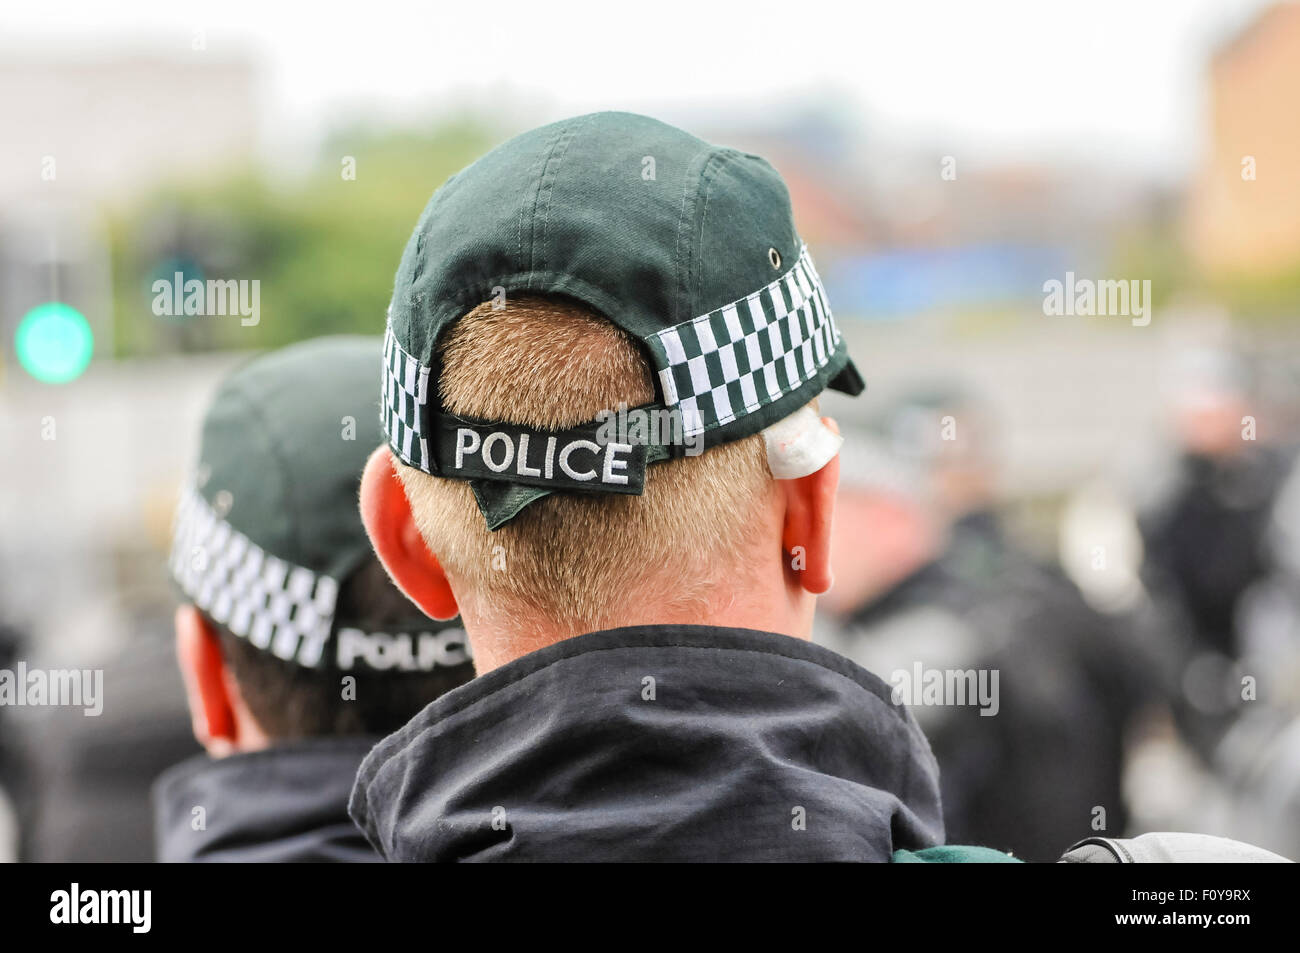 Police officers stand guard at a public event, wearing baseball caps. Stock Photo